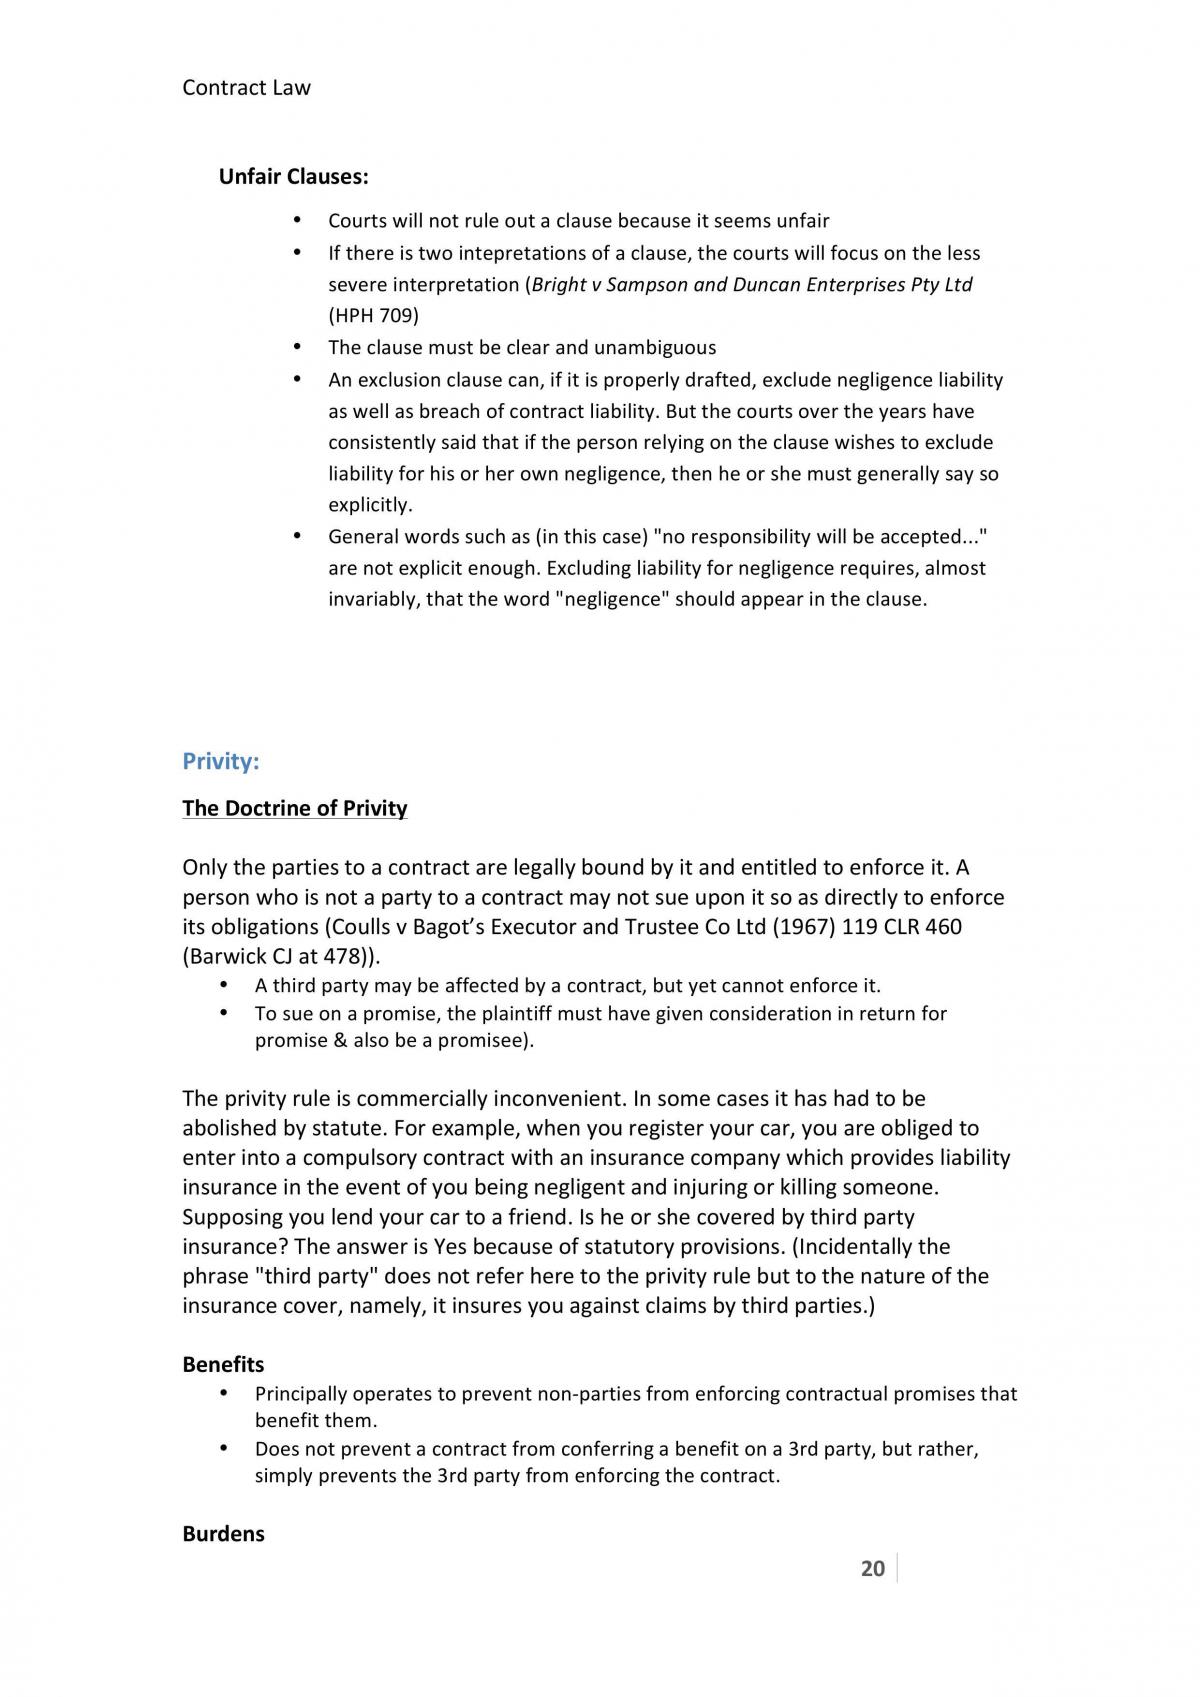 Contract Law full notes - Page 20